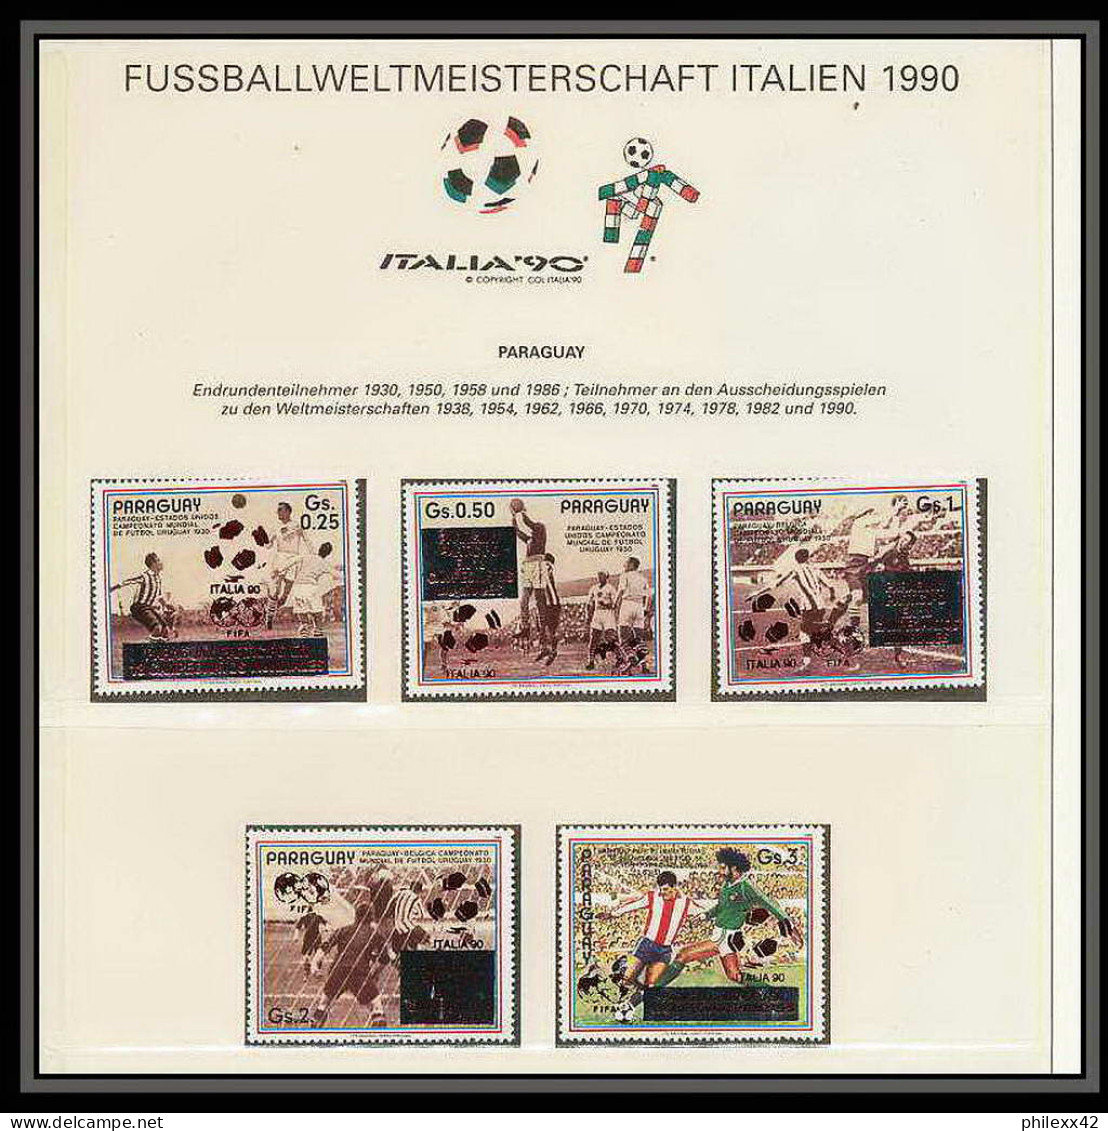 184 Football (Soccer) Italia 90 Neuf ** MNH - Paraguay Overprinted In Red  - 1990 – Italien